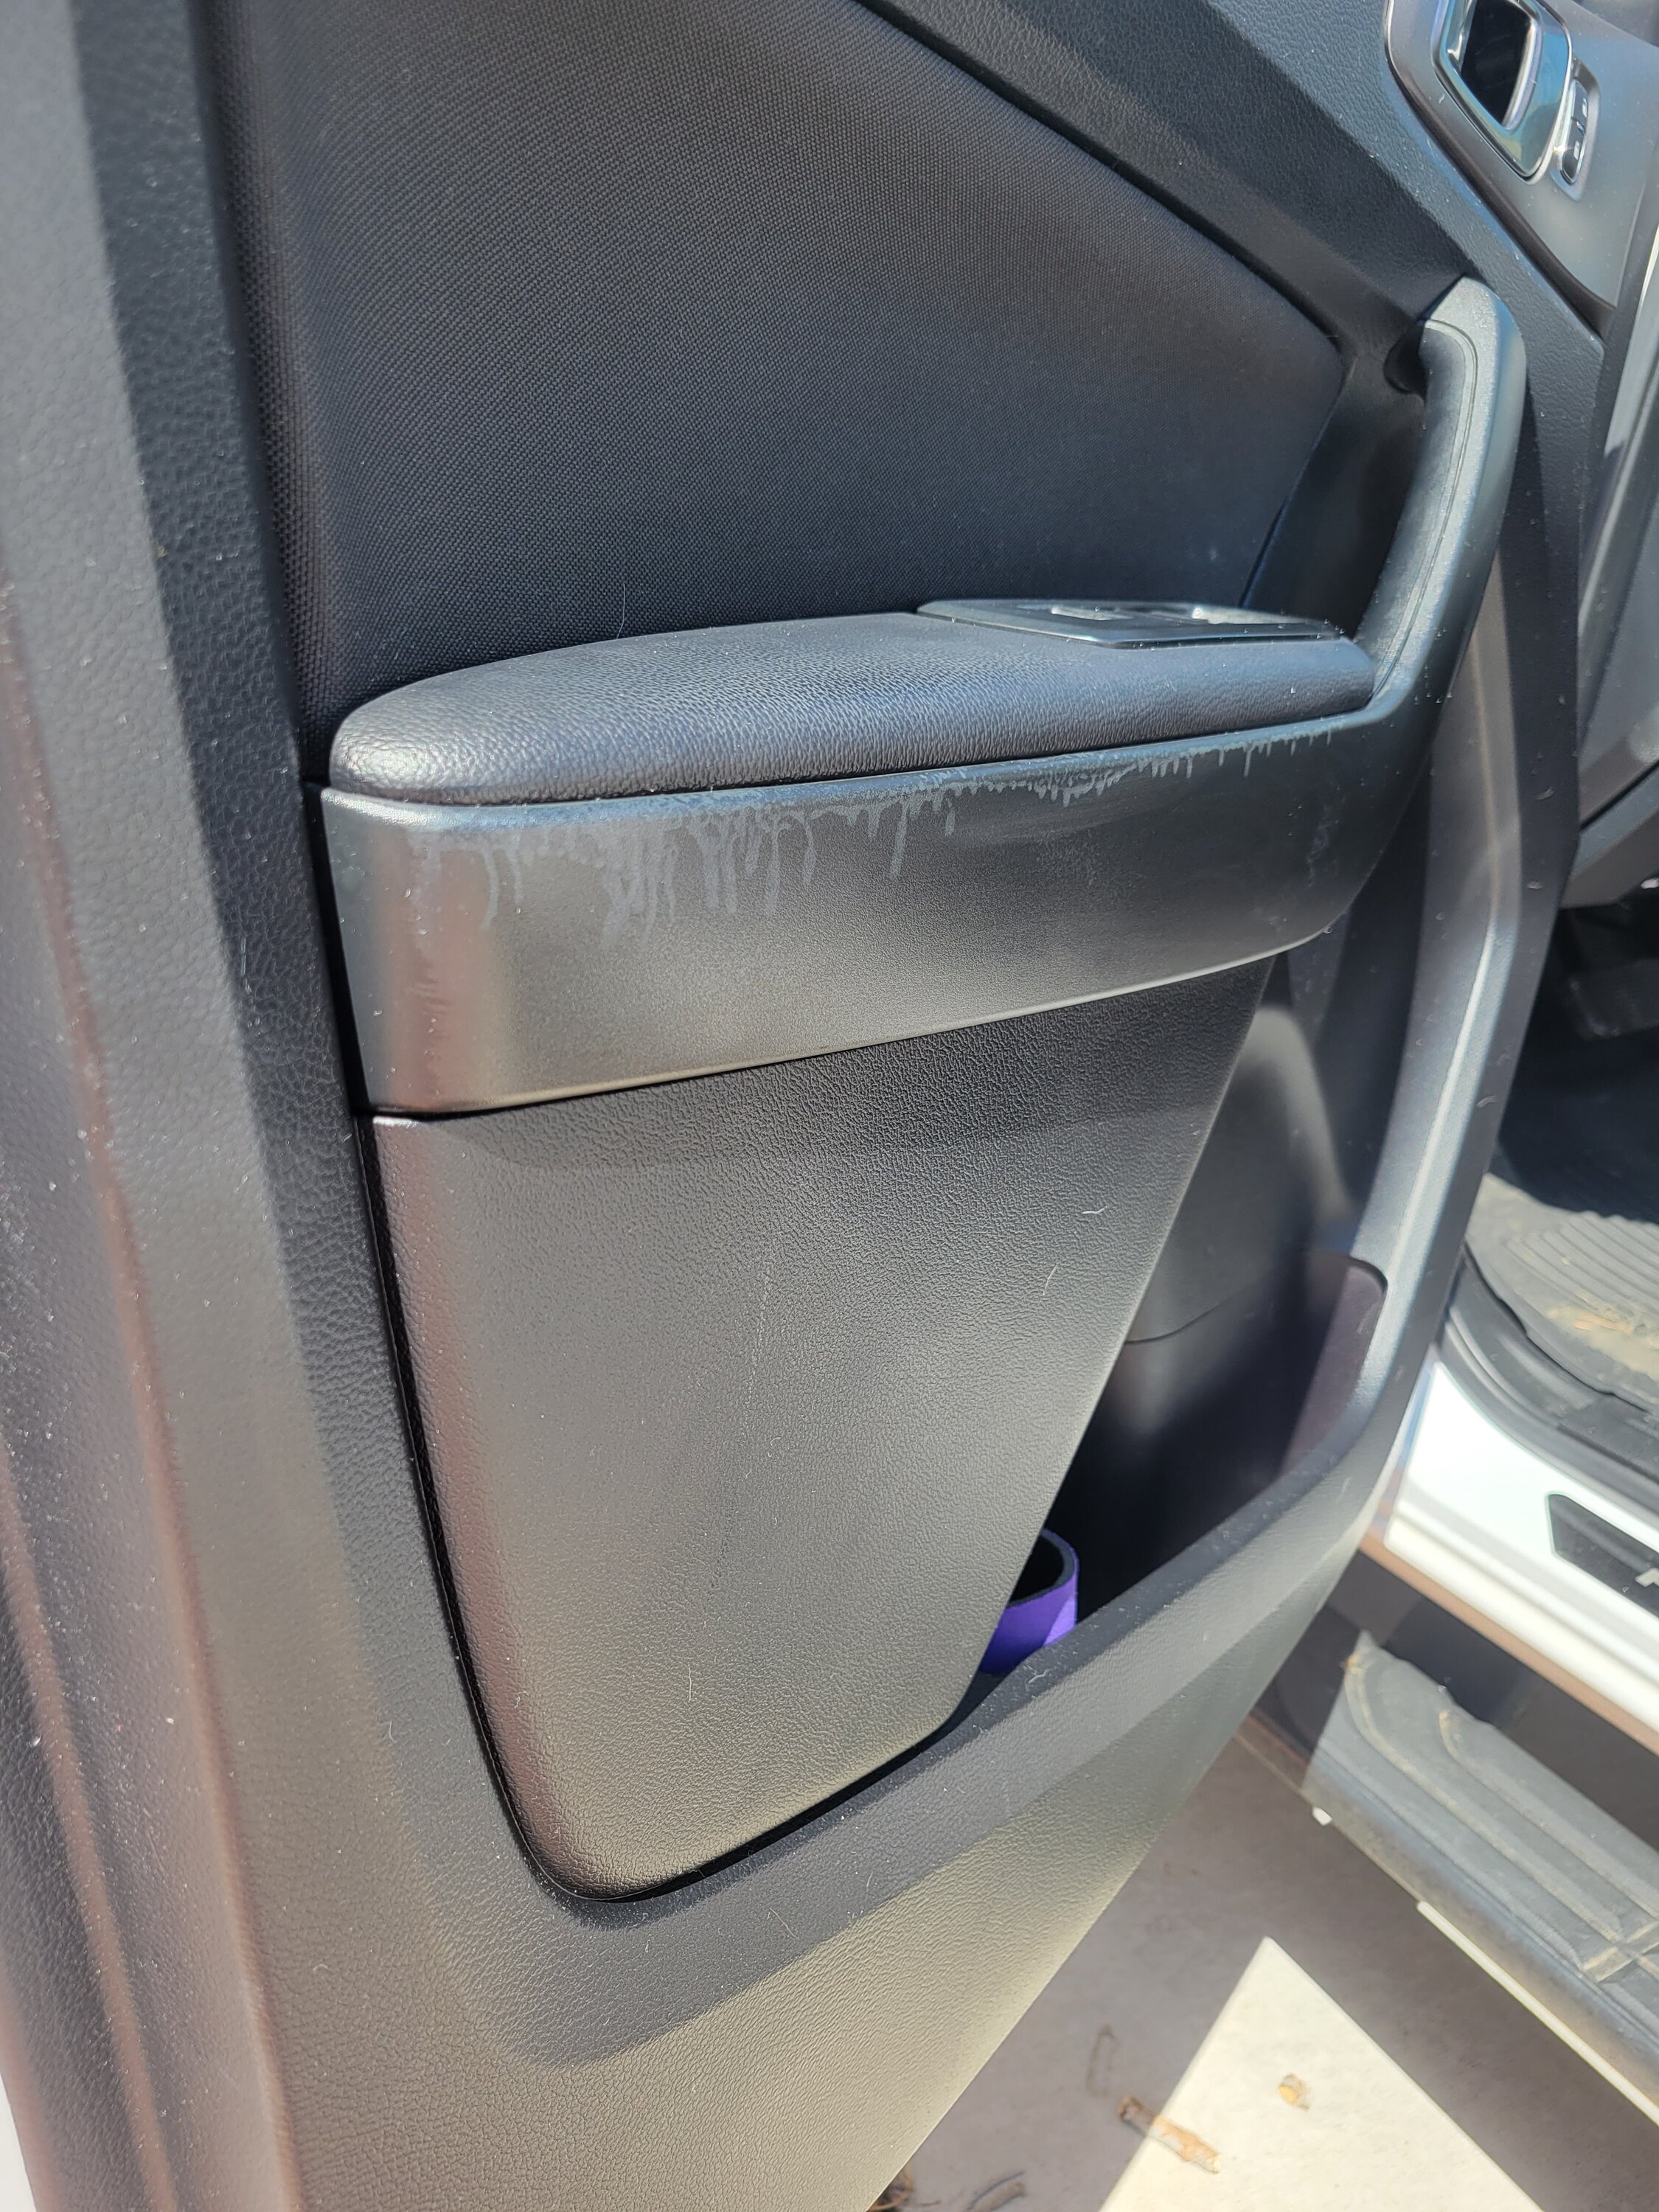 Discoloration on Plastic Door Handle  2019+ Ford Ranger and Raptor Forum  (5th Generation) 